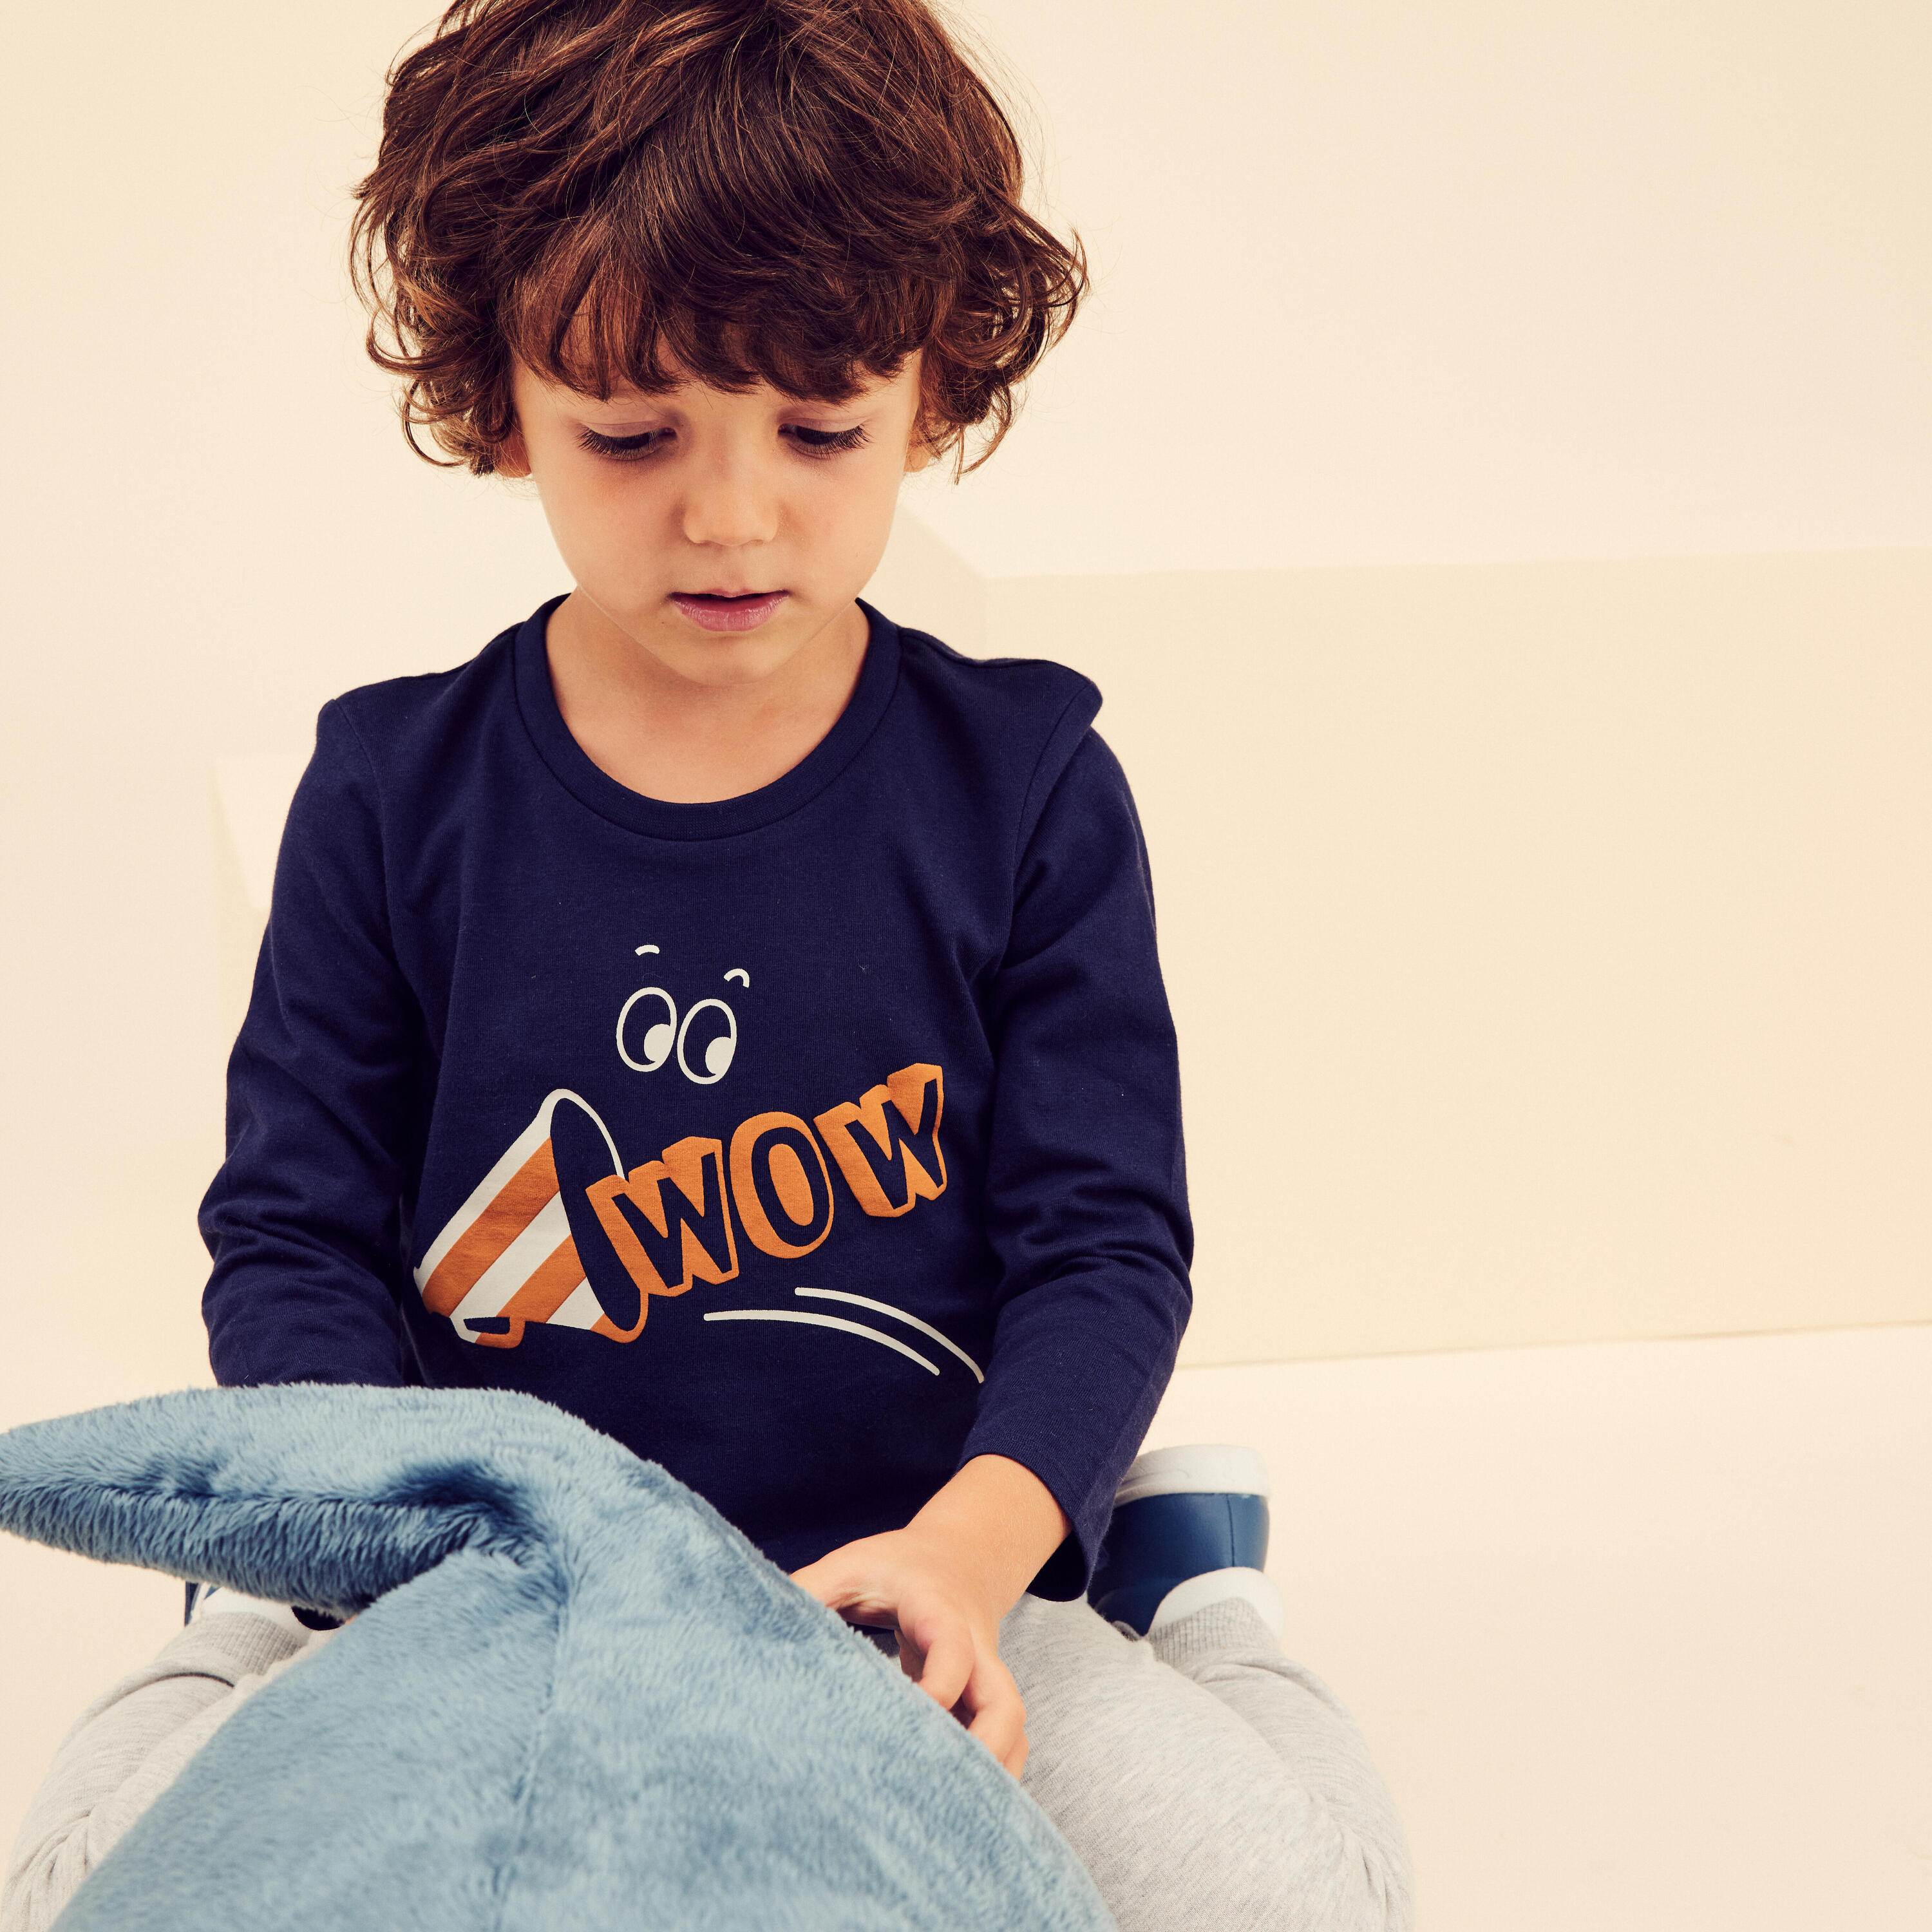 Kids' Long-Sleeved Cotton T-Shirt Basic - Navy Blue with Pattern 3/6